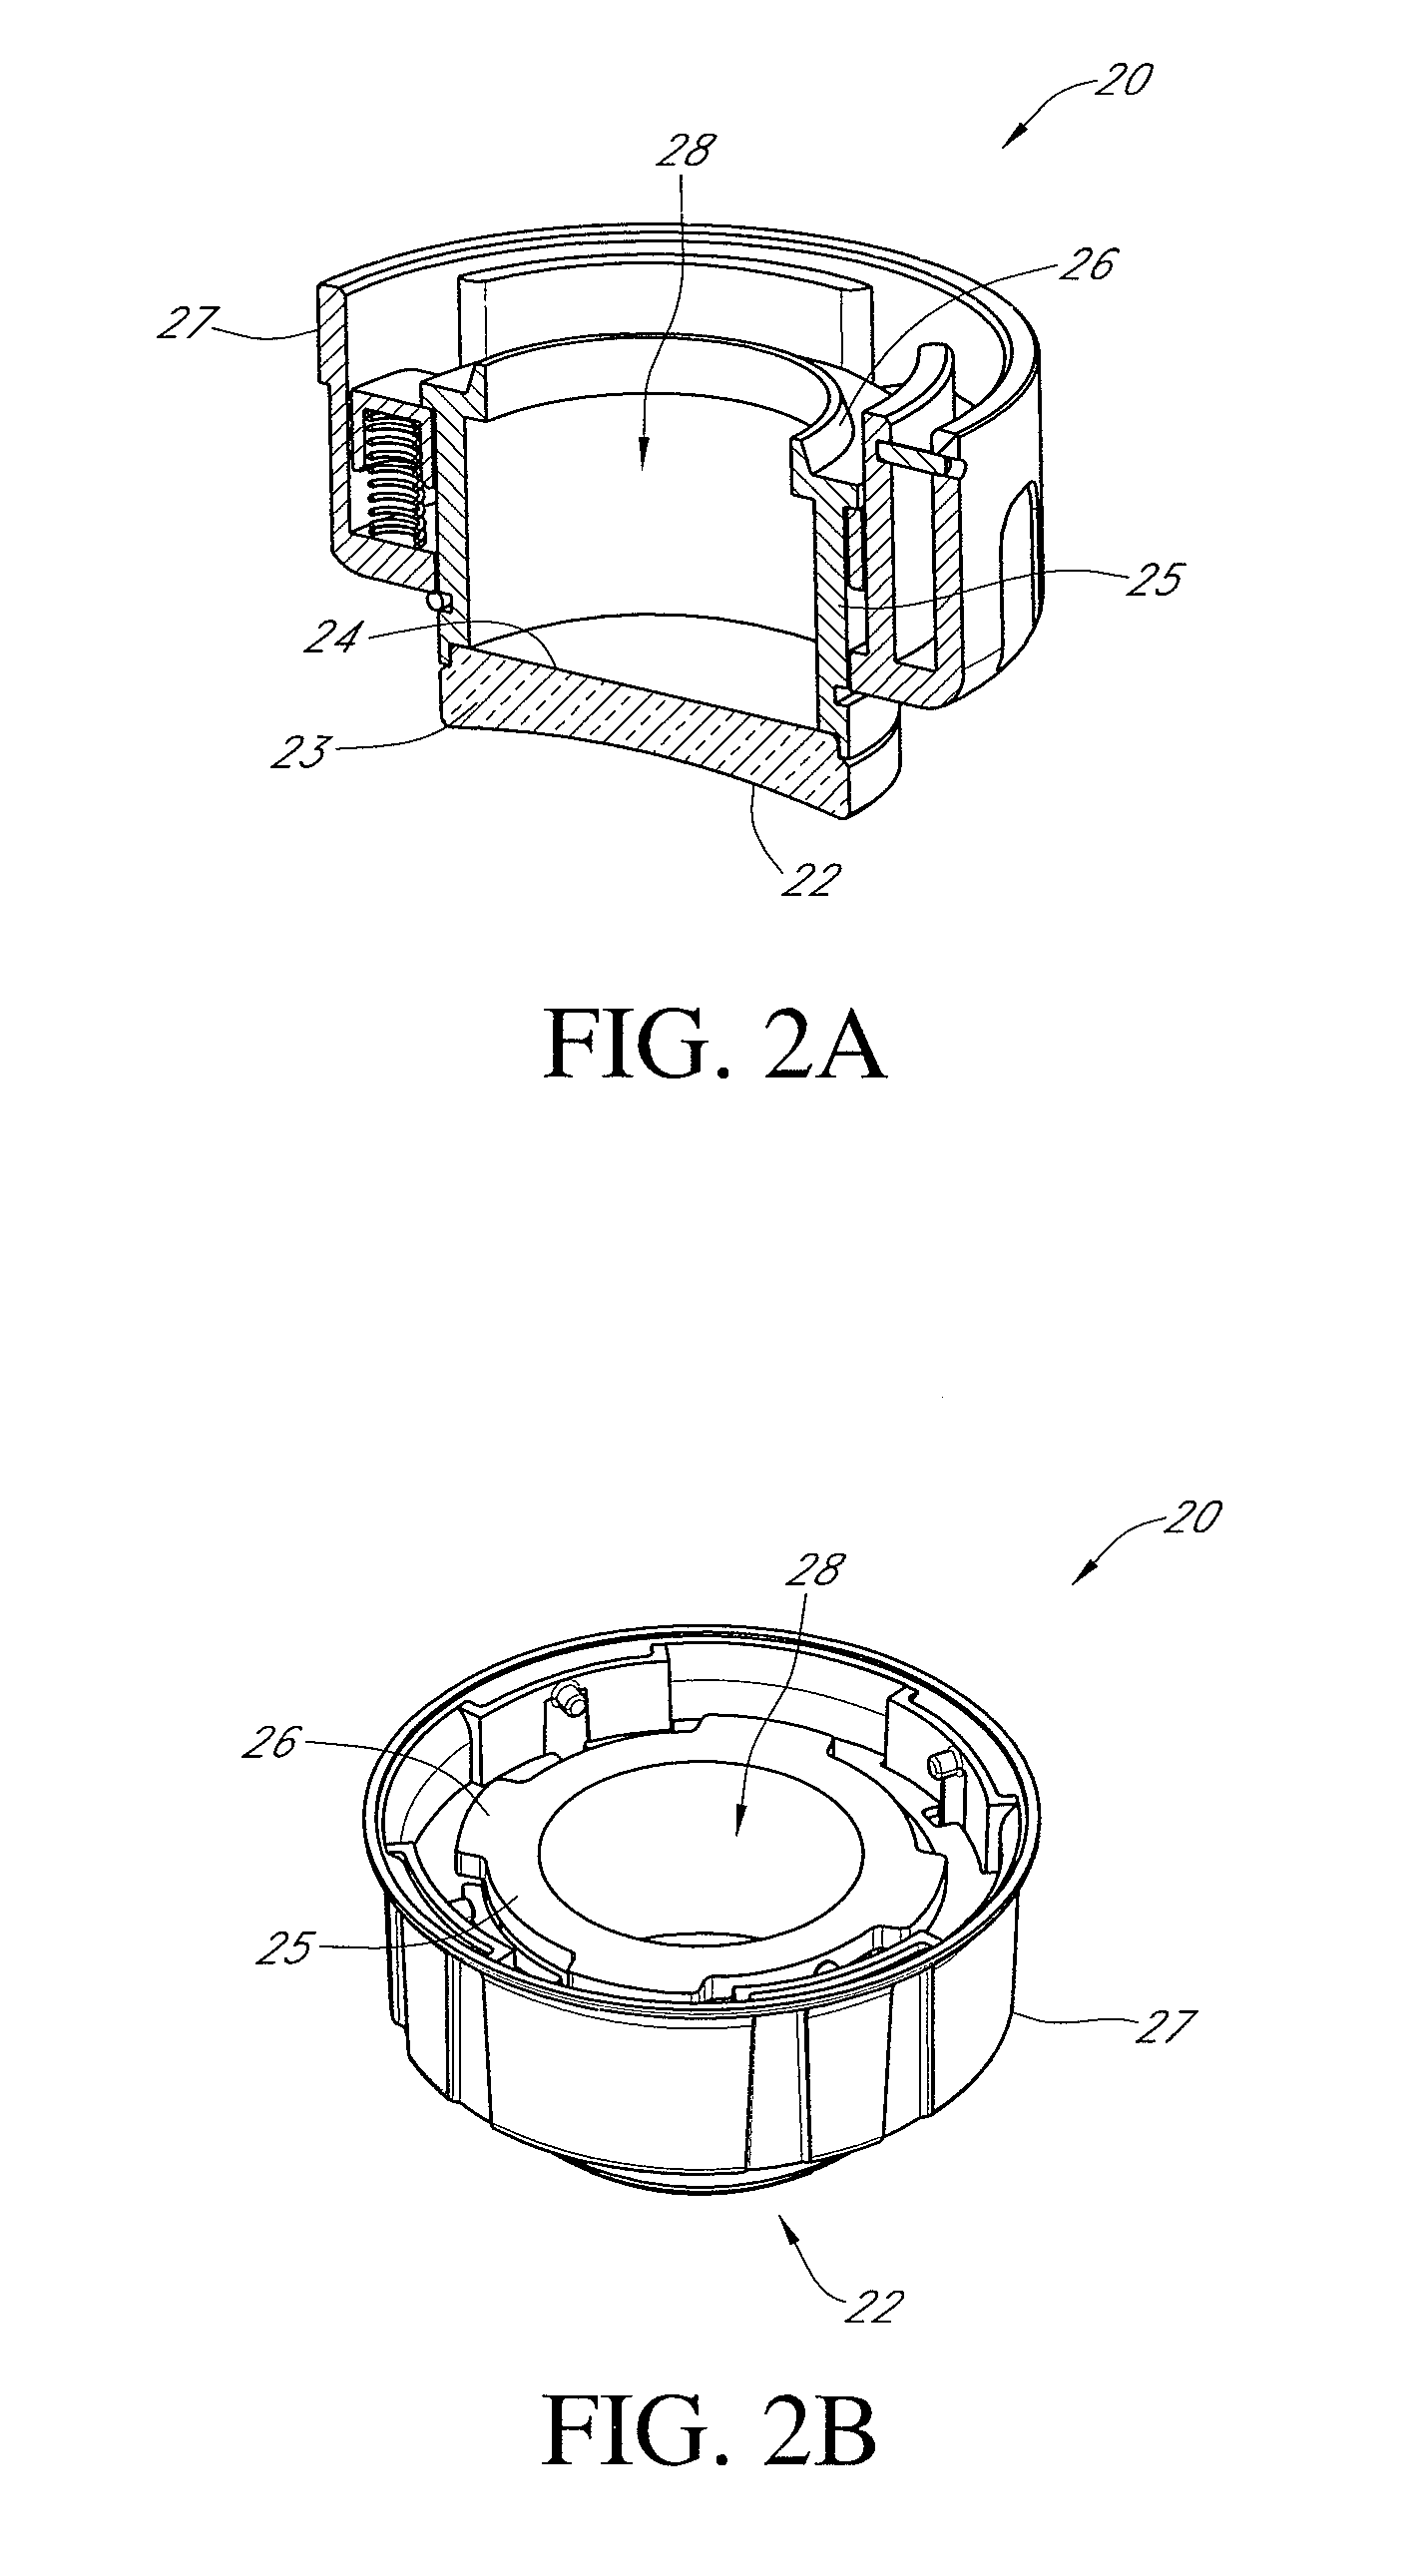 Apparatus and method for irradiating a surface with light